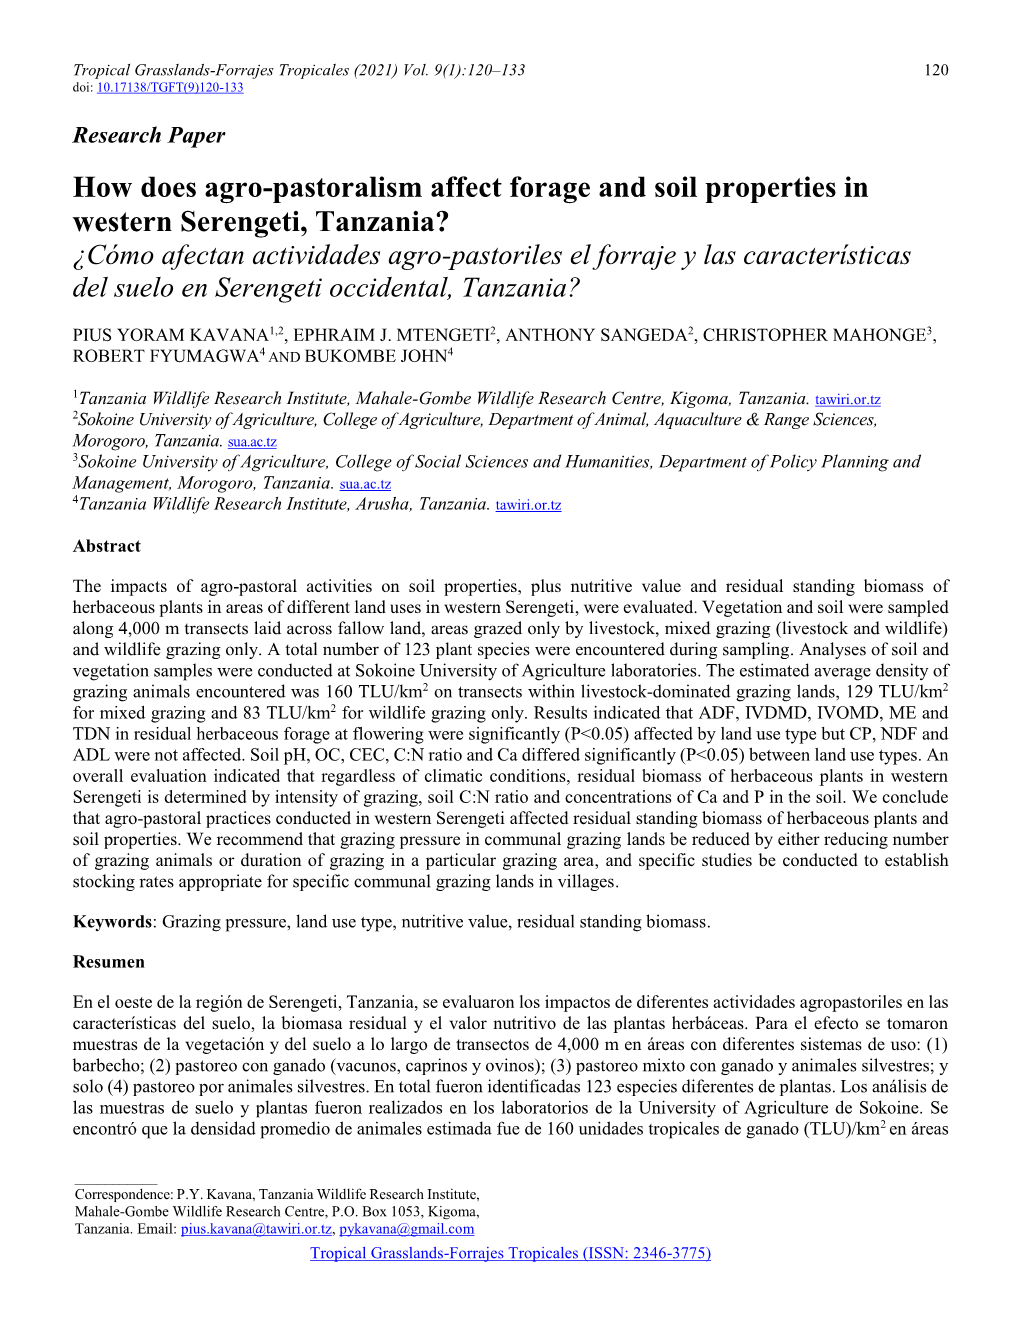 How Does Agro-Pastoralism Affect Forage and Soil Properties In